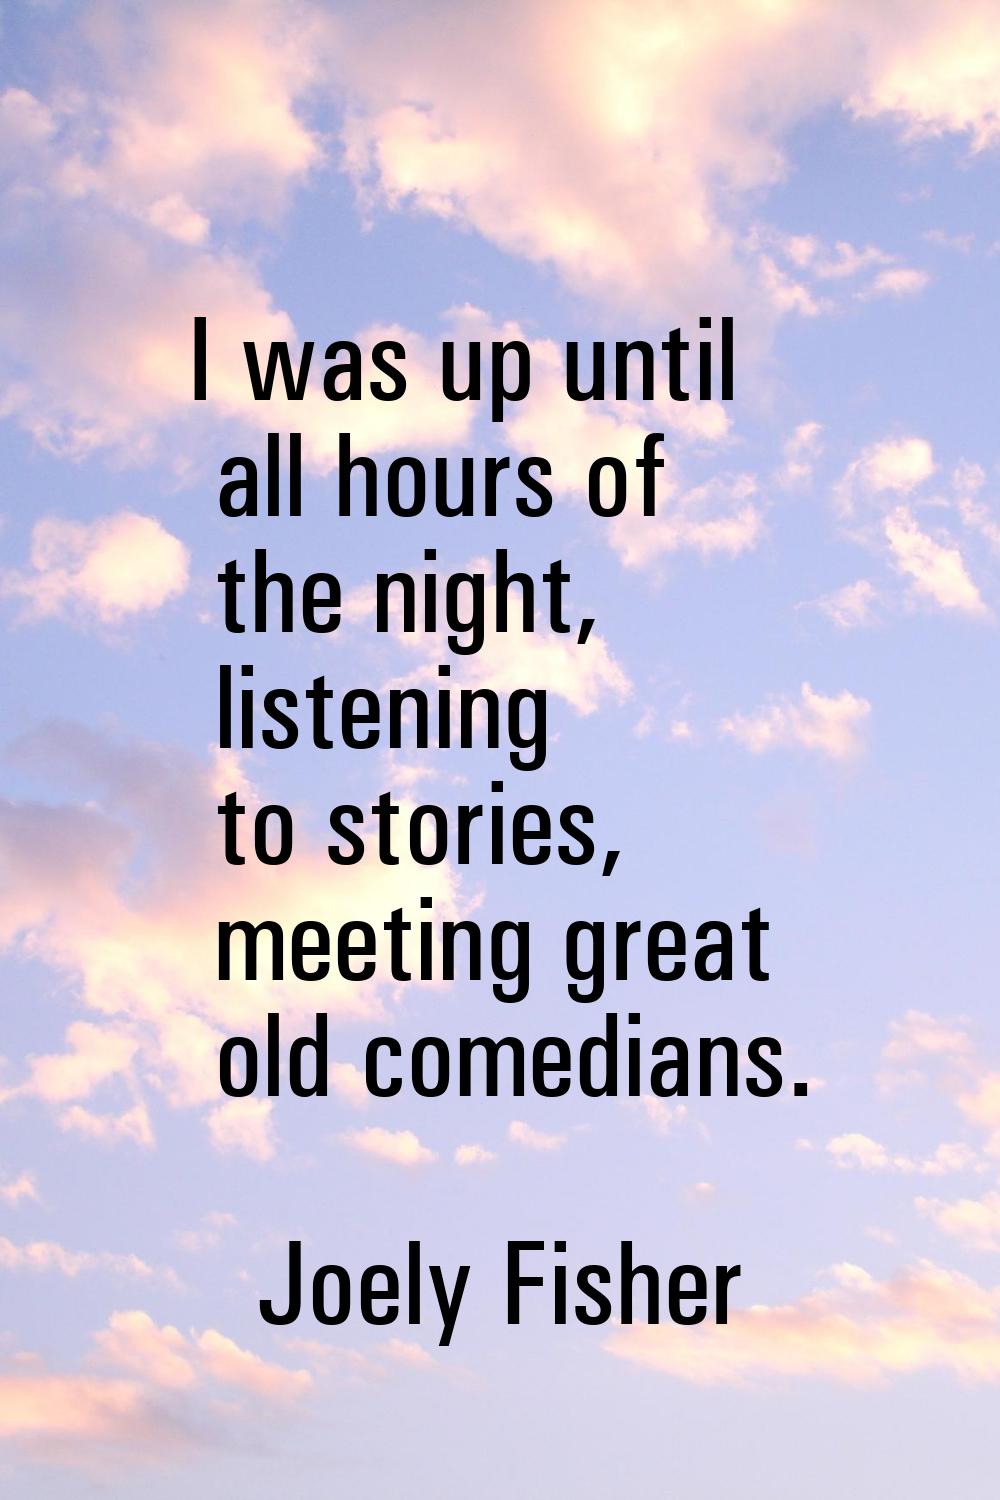 I was up until all hours of the night, listening to stories, meeting great old comedians.